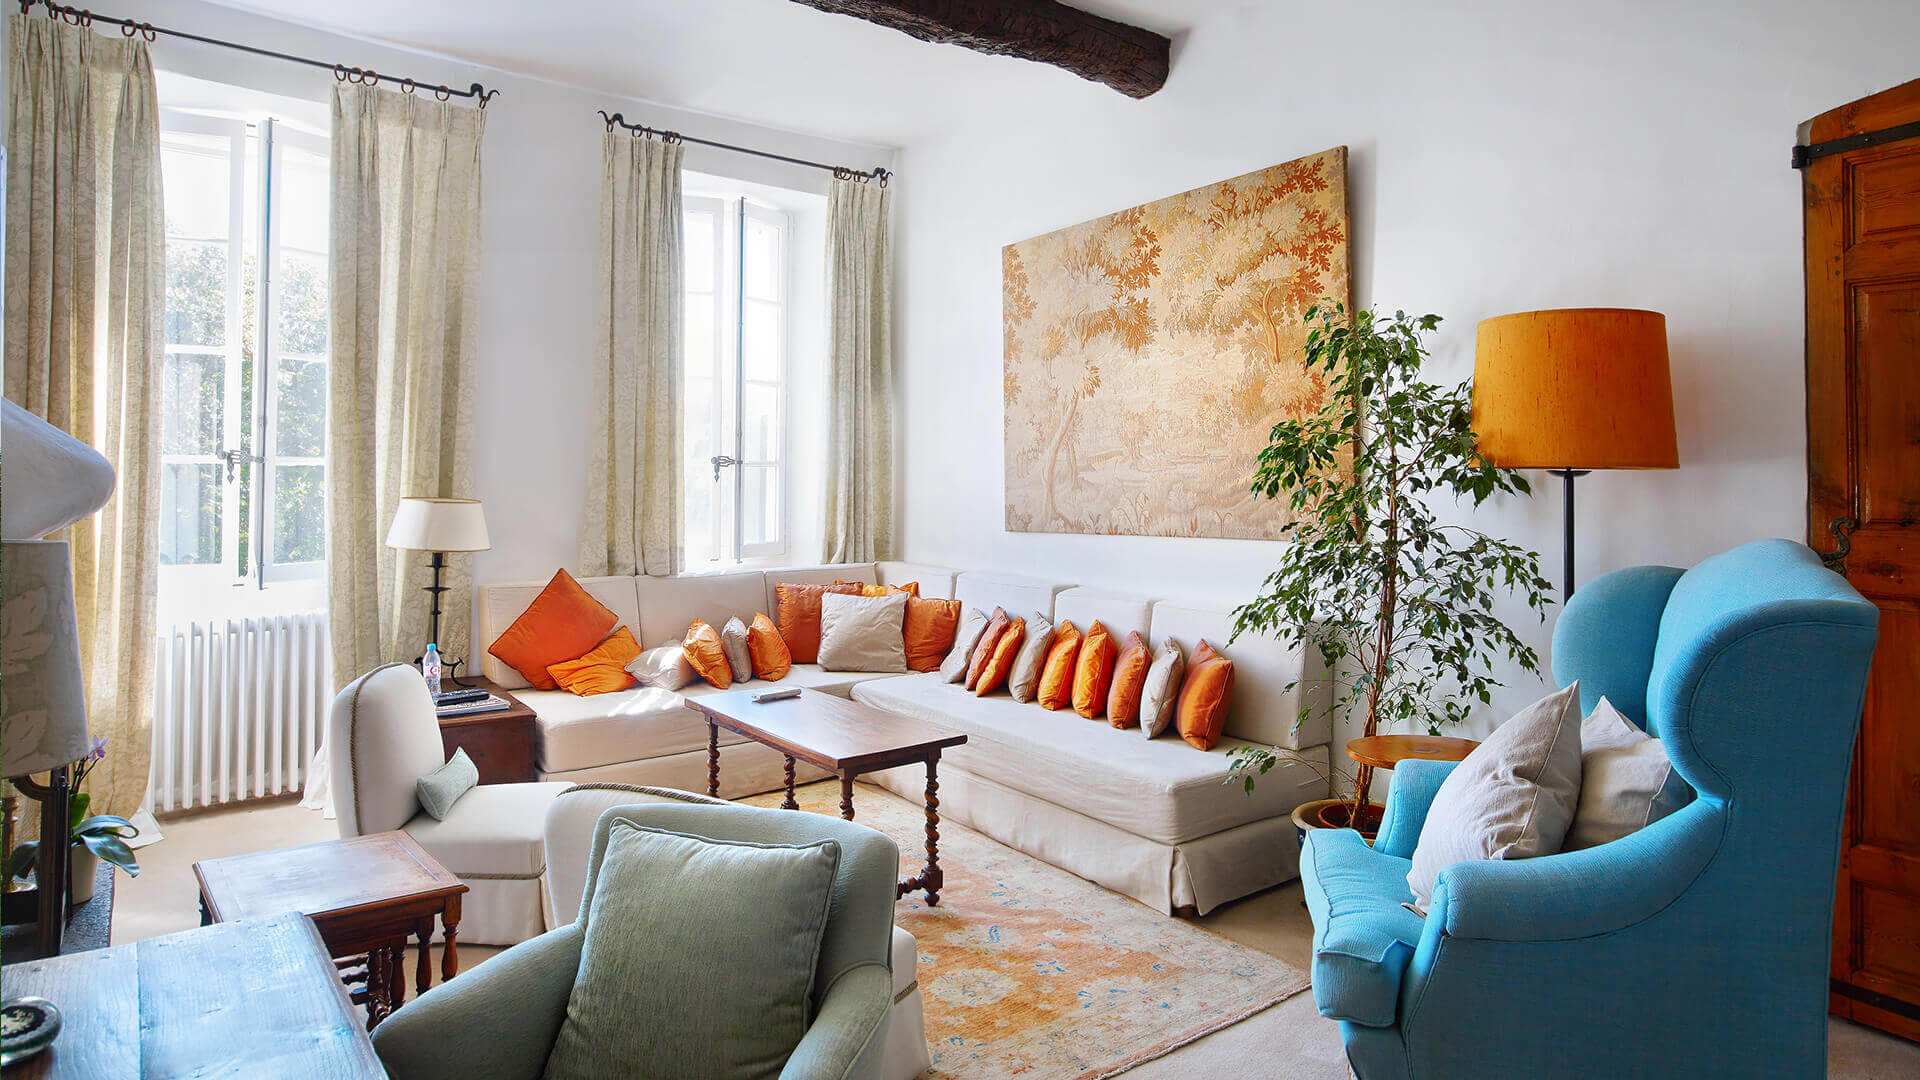 Large Domain Valbonne living room with sofa and orange pillows